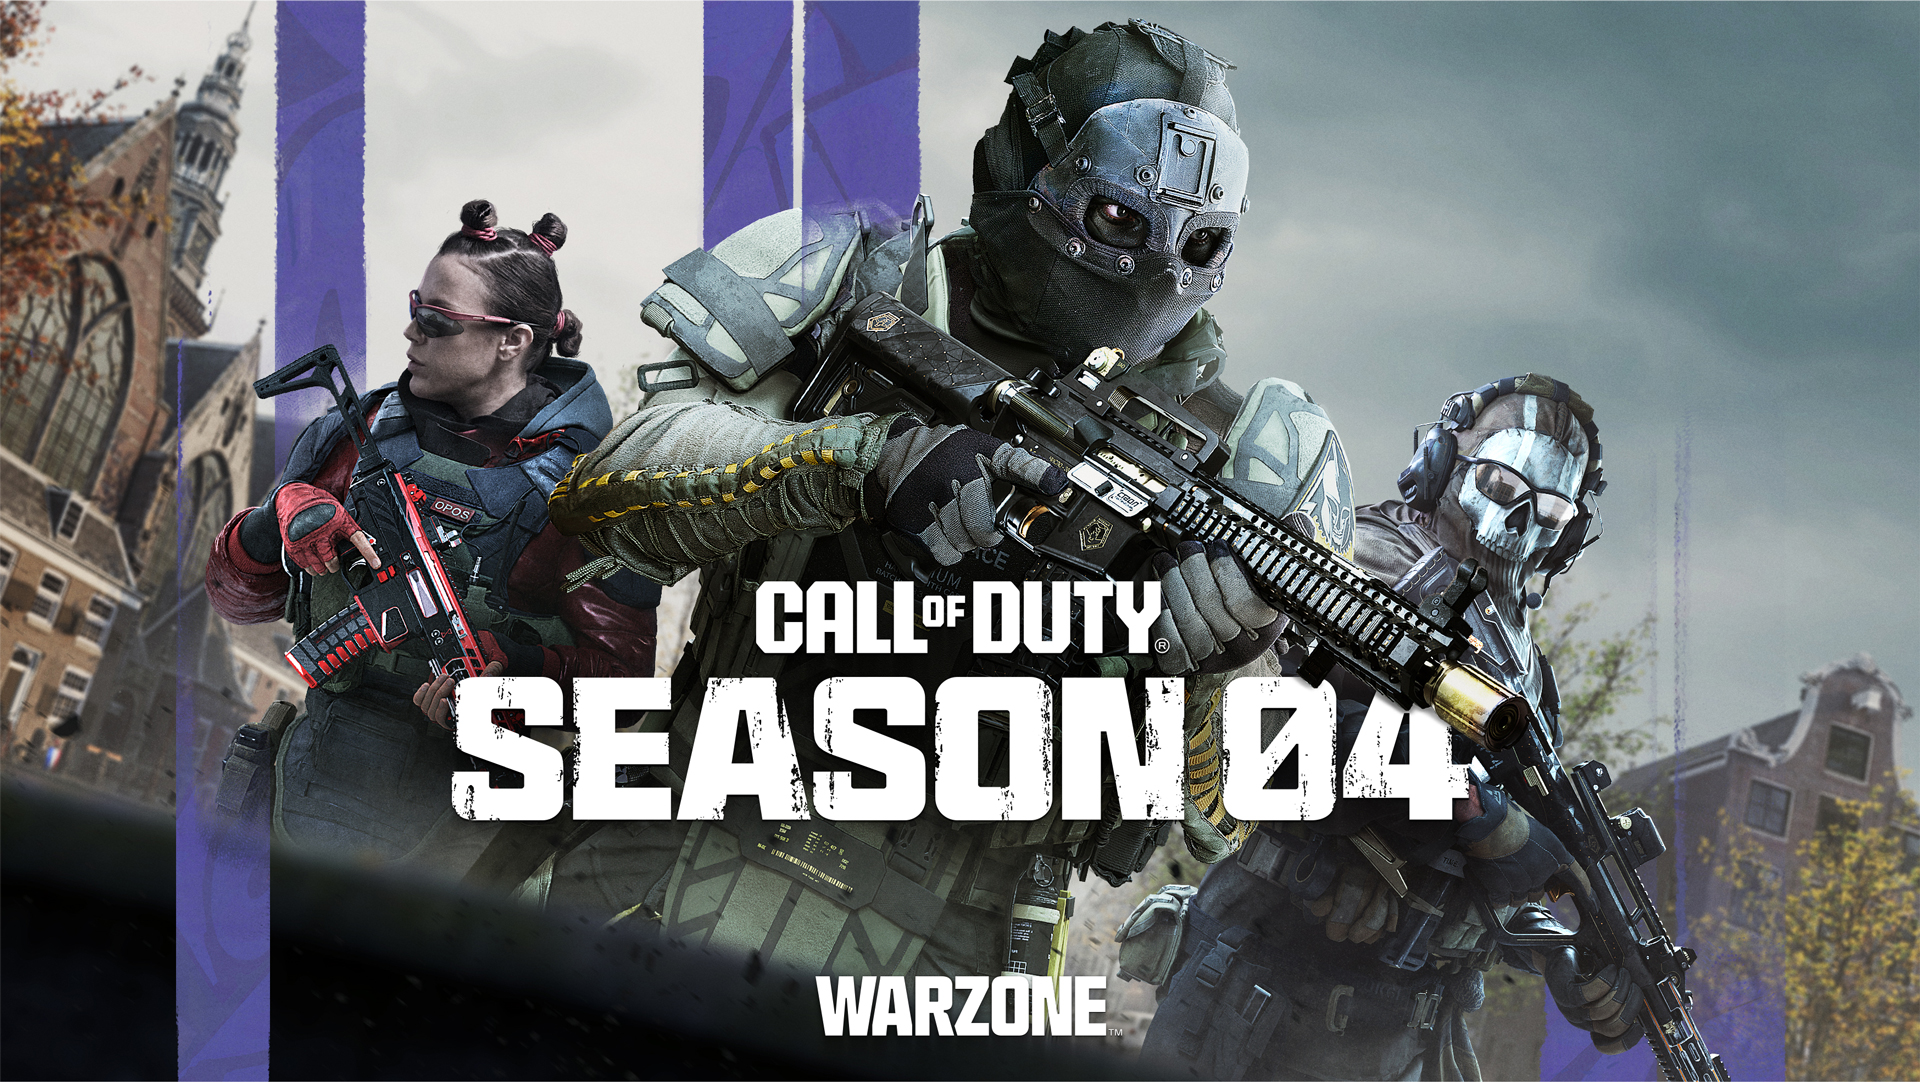 Season 6 of Call of Duty: Modern Warfare 2 and Warzone Introduces